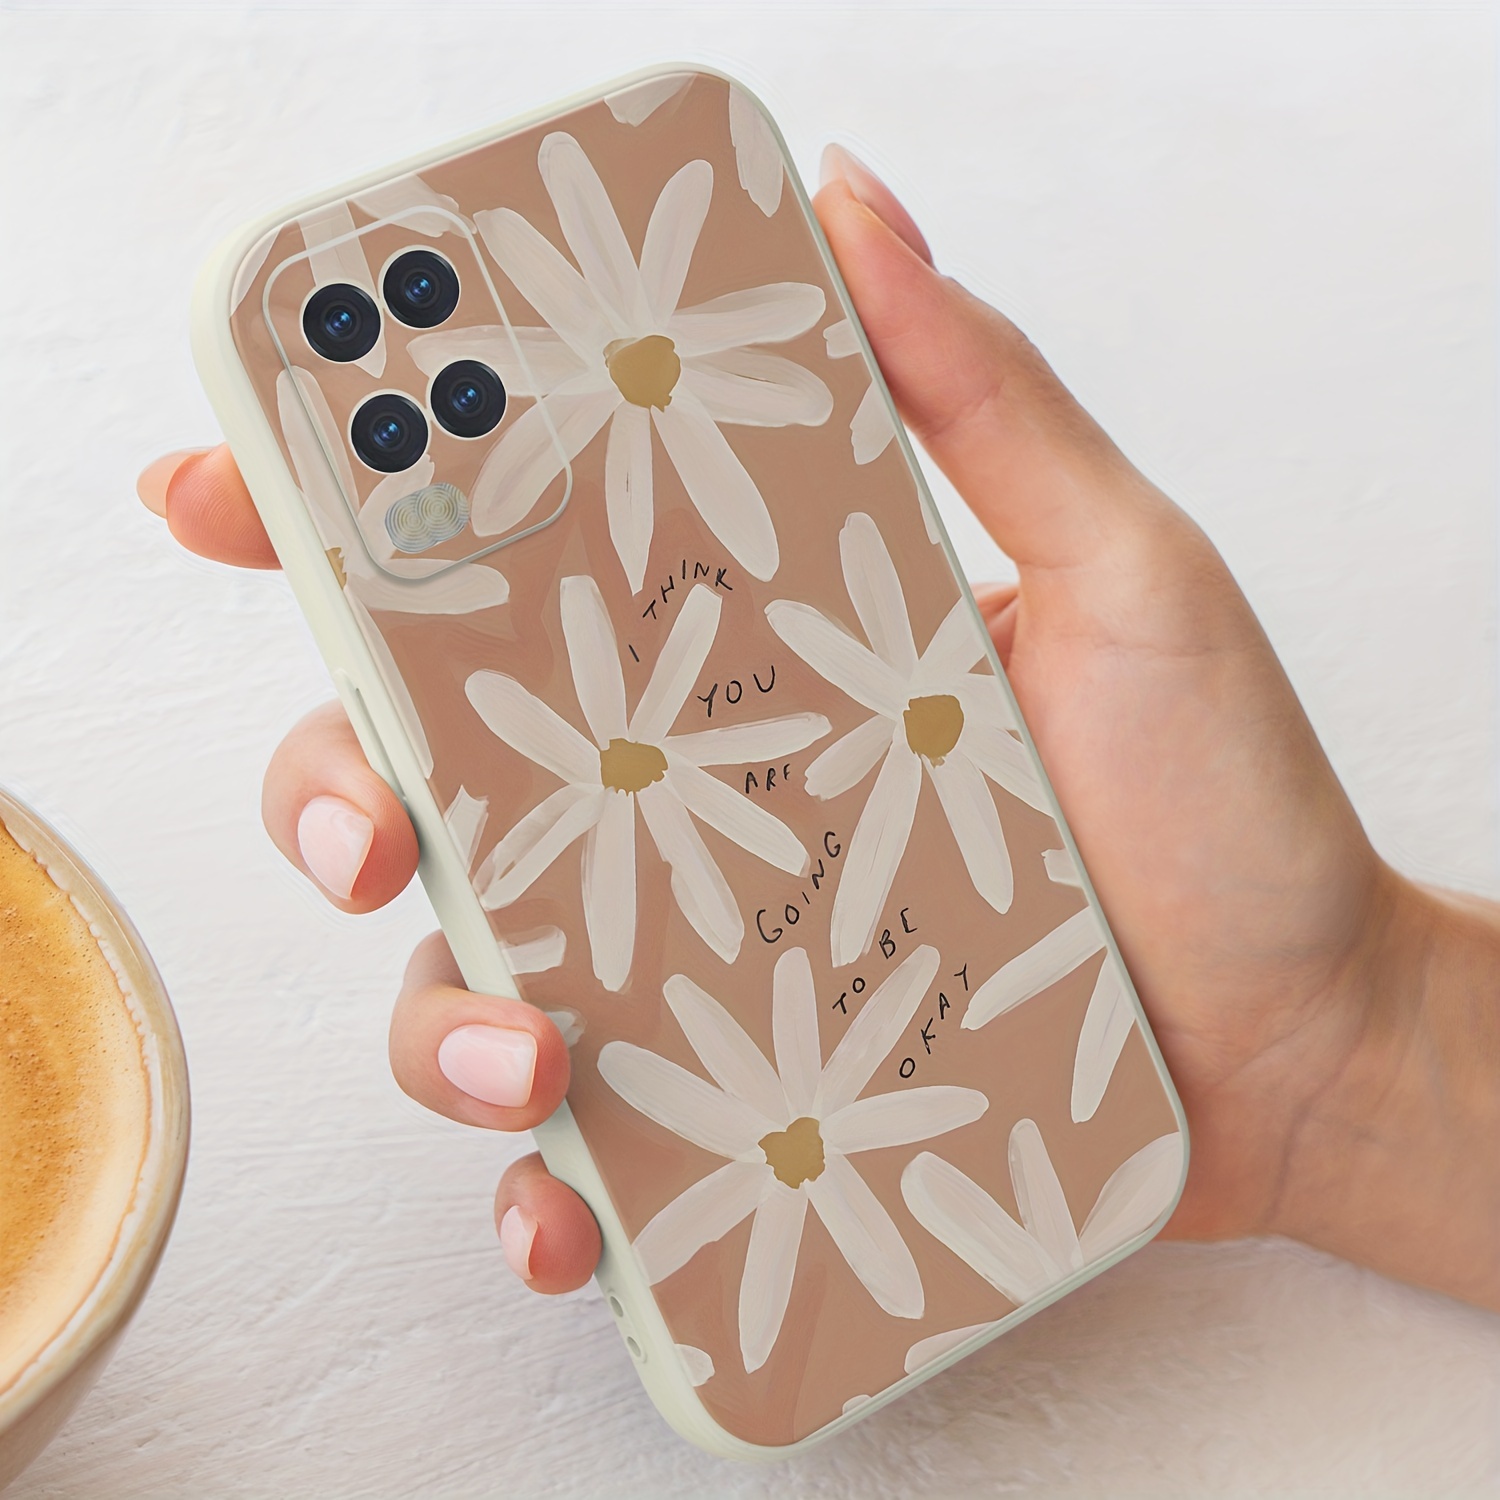 

Simple Style White Flower Pattern For Oppo A F S K Pro 1 3 5 7 9 11 15 16 17 19 52 53 54 55 71 72 73 74 91 92 93 94 Foreign 2020 2021 4g Tpu Material Phone Case